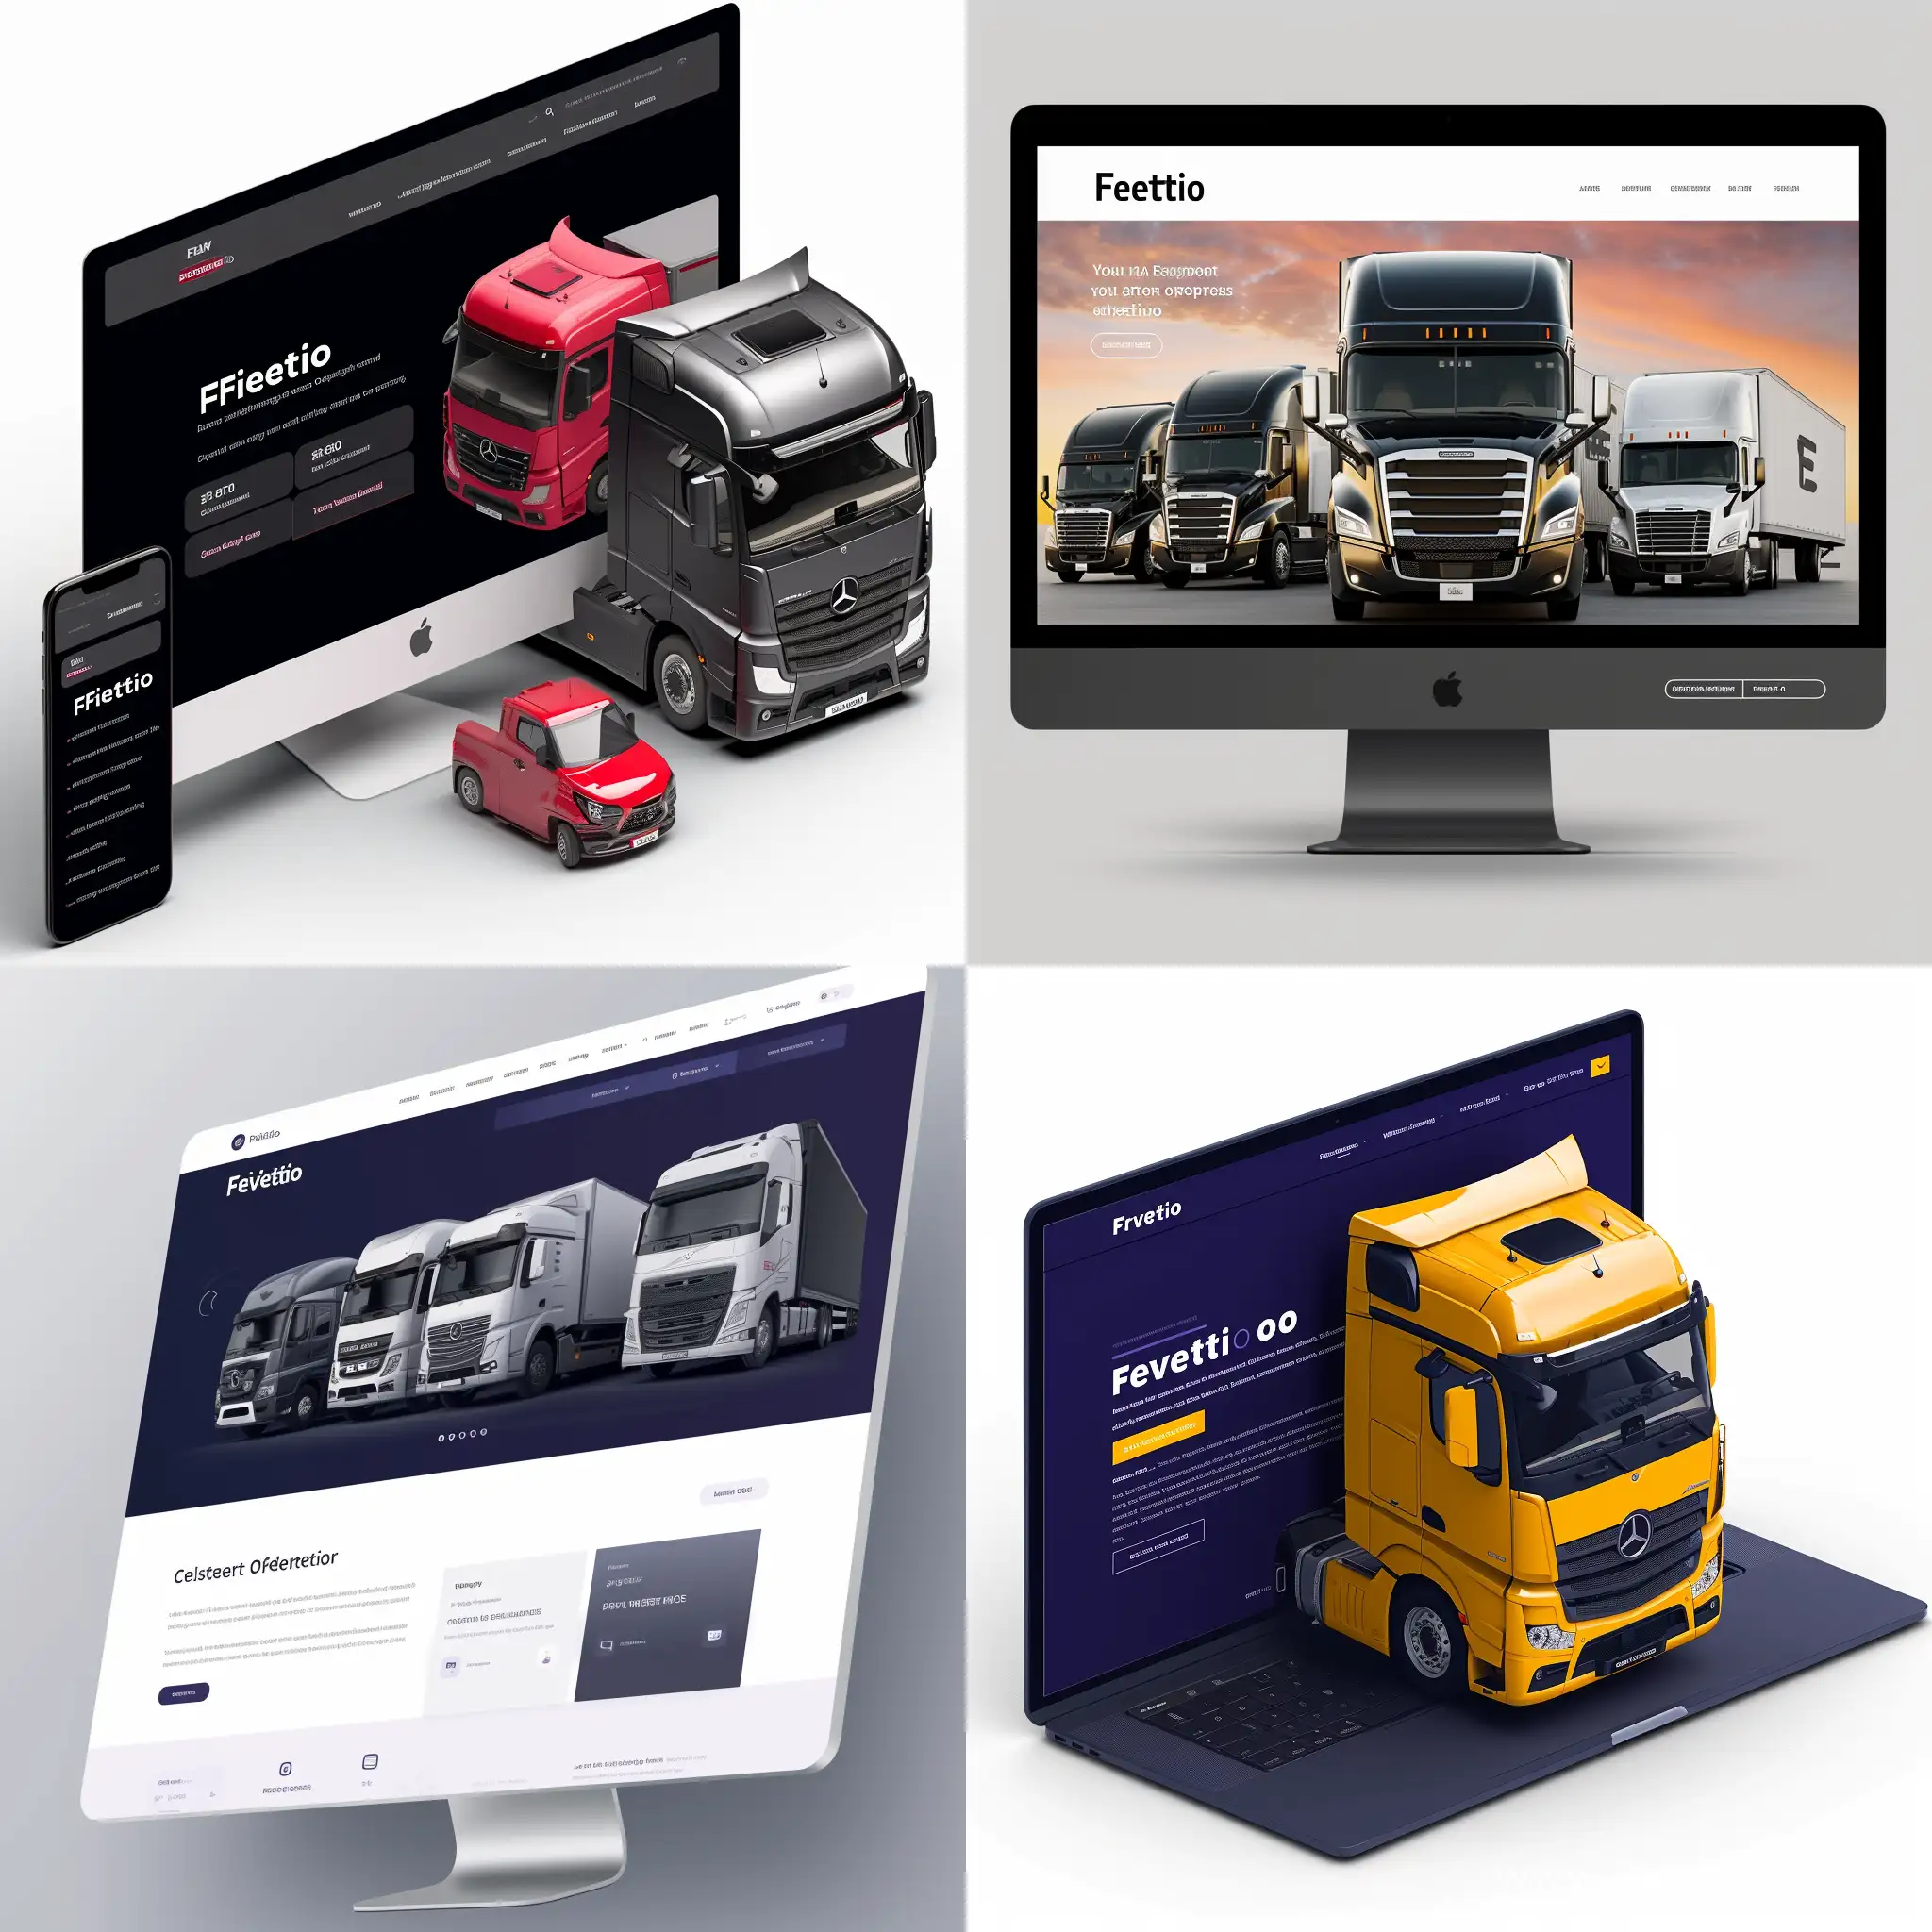 Create a page for my website, which is a fleet management and transportation operations platform called "Fleetio"